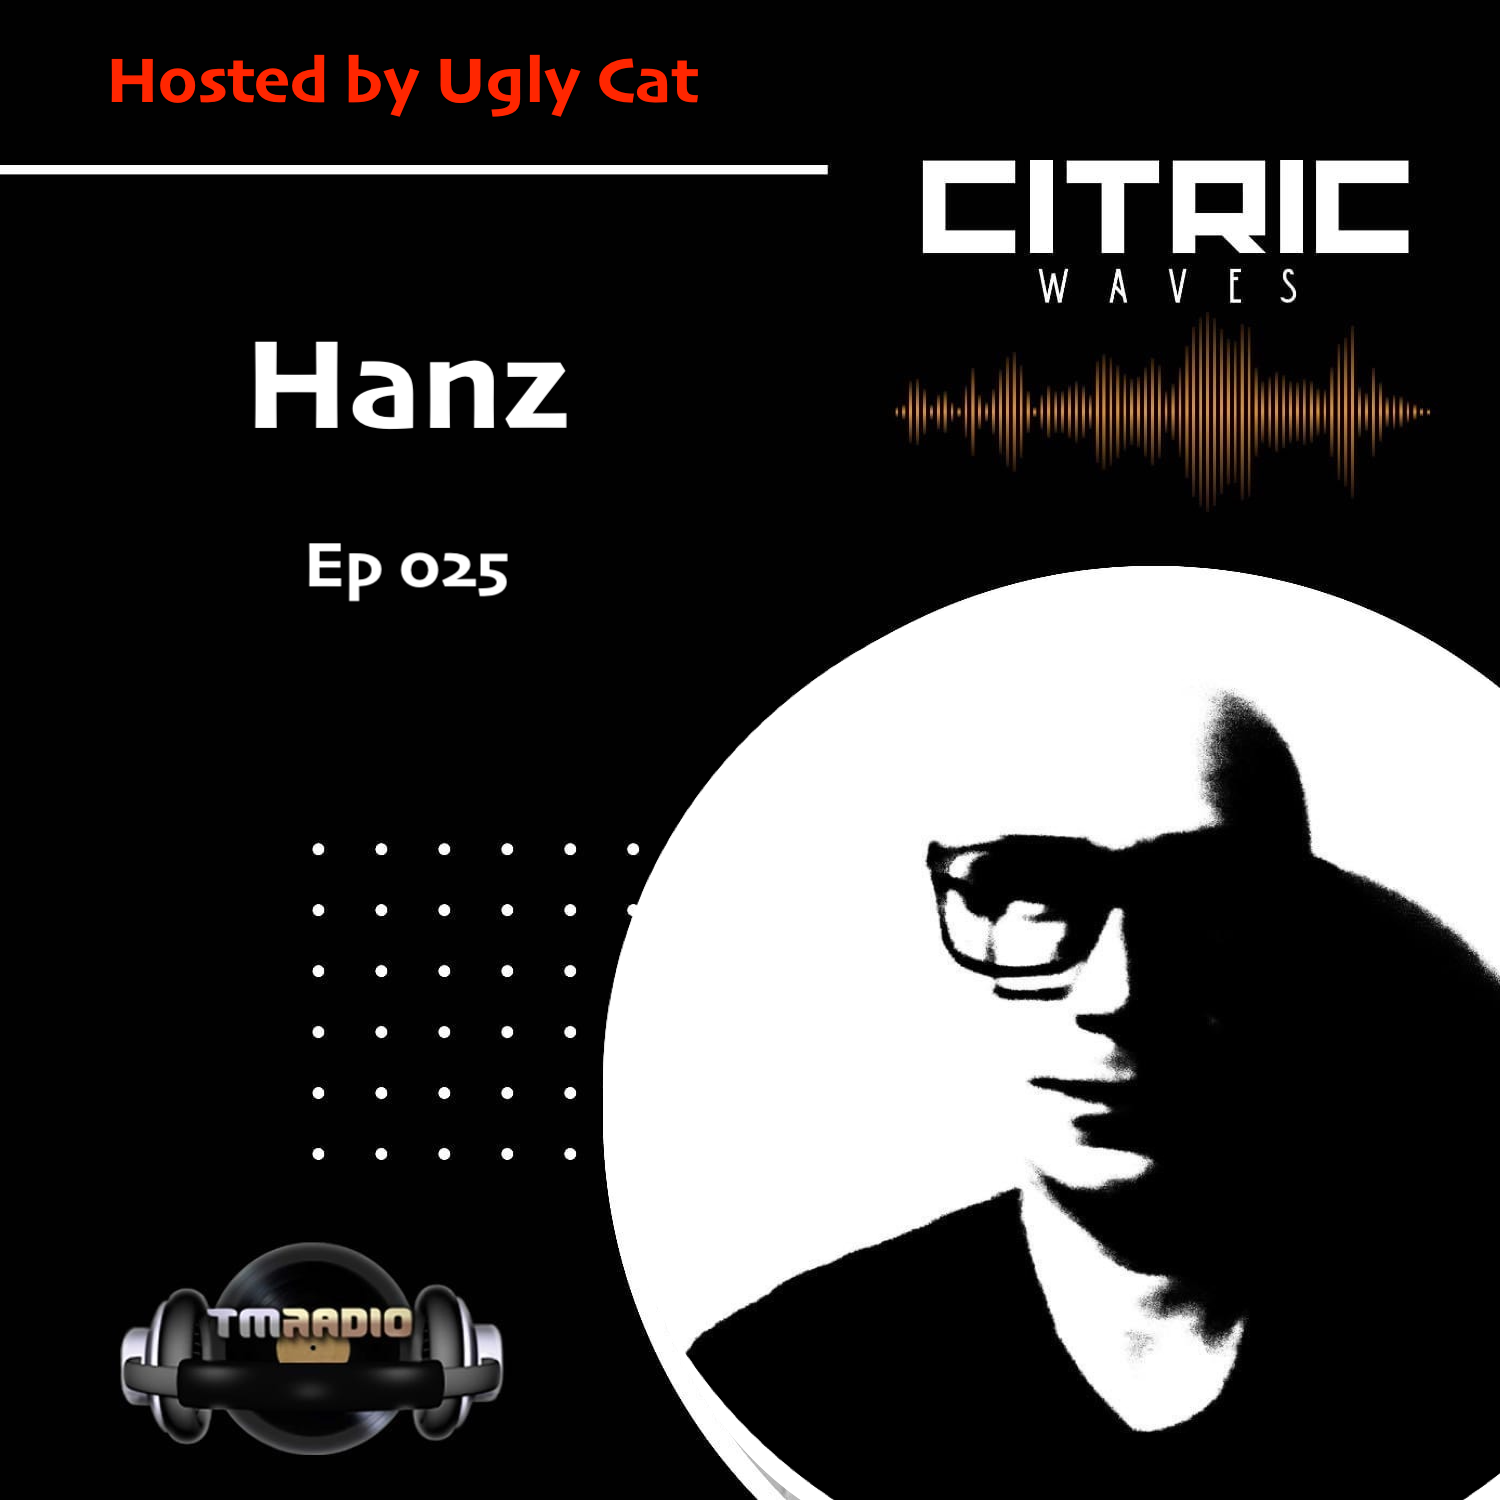 Citric waves 025 Hanz Mx (from May 9th)